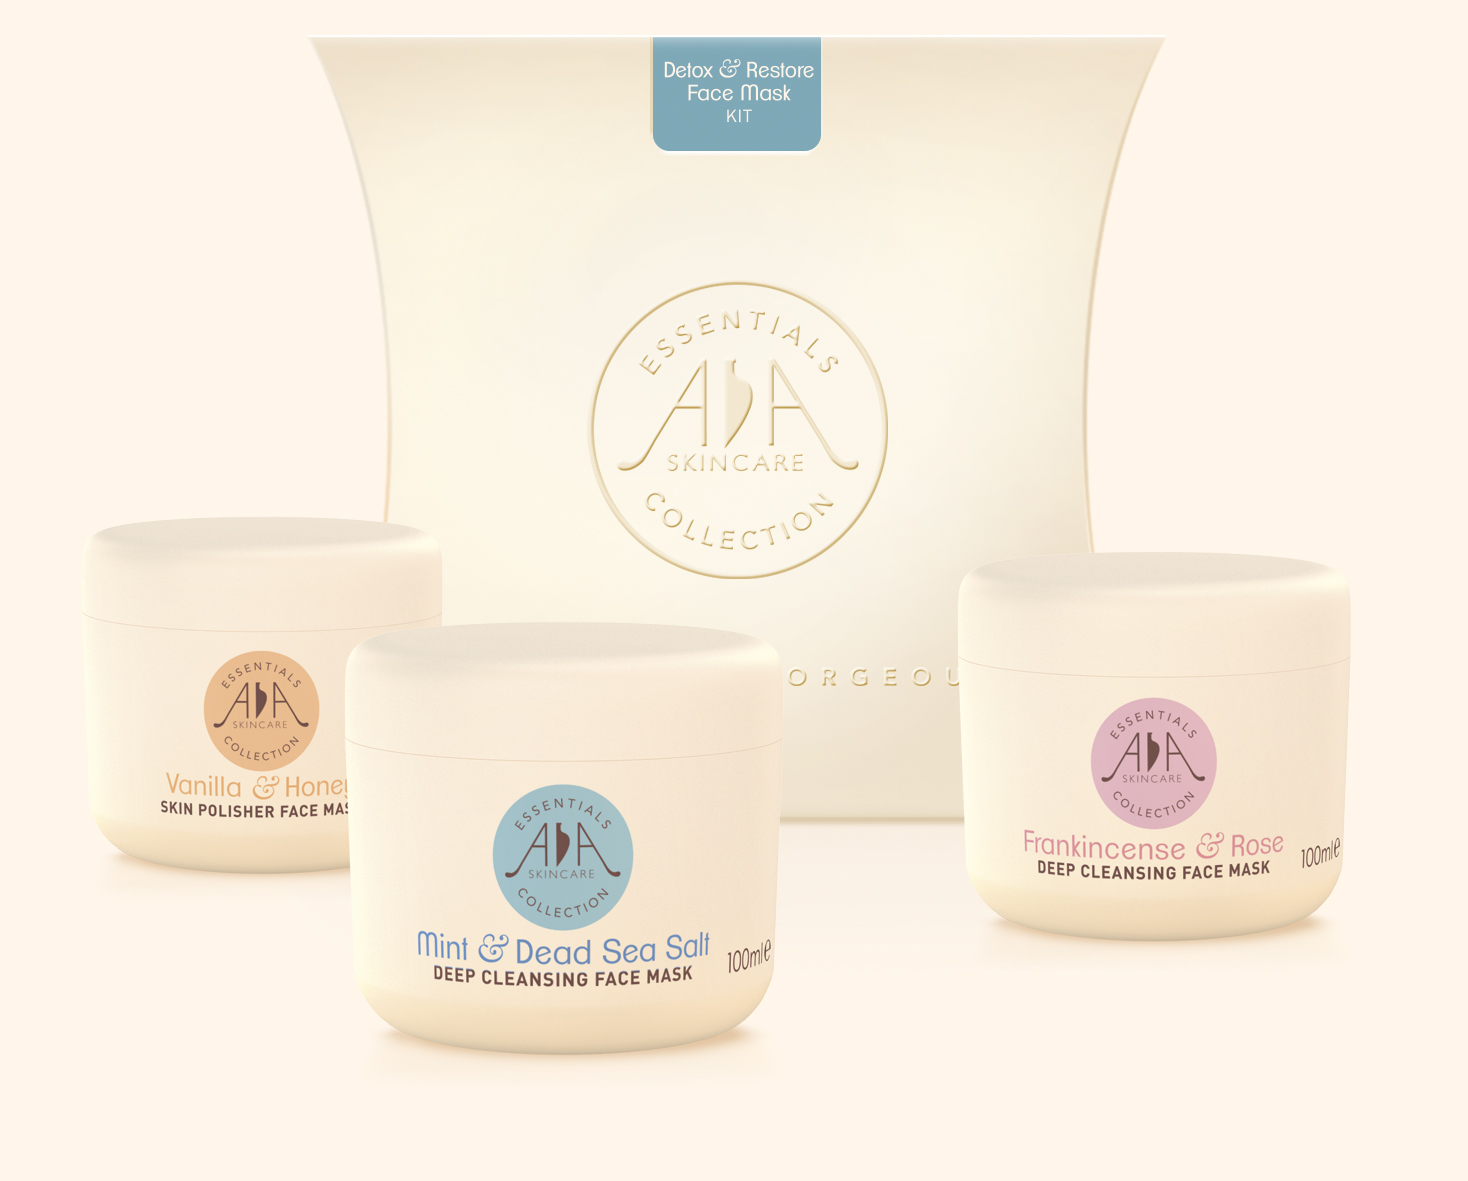 Detox & Restore Face Mask Collection